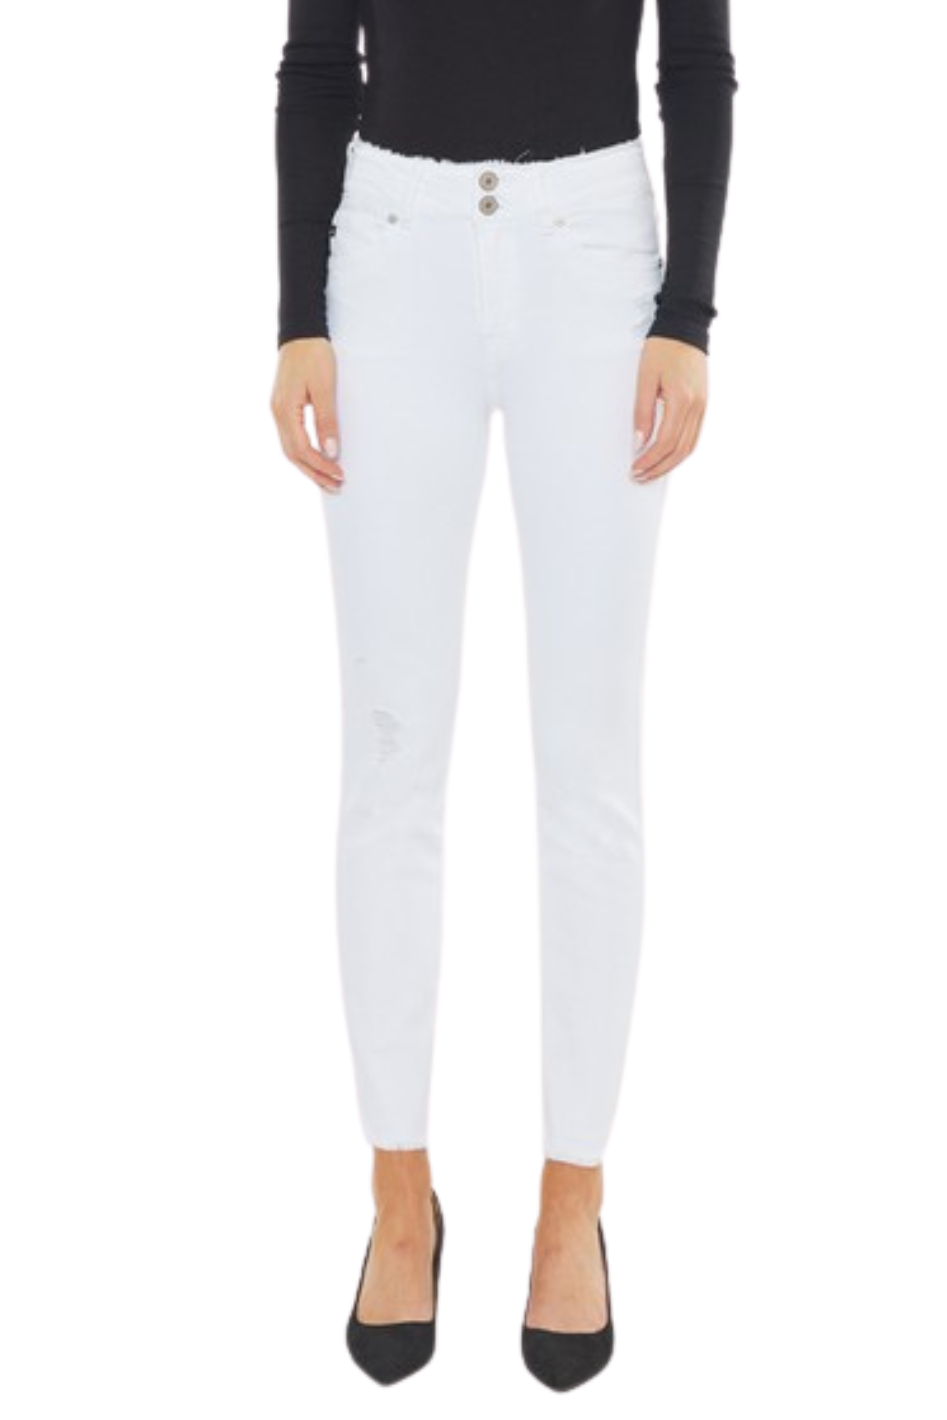 Double Waist Wonder Skinny Jeans - Expressive Collective CO.